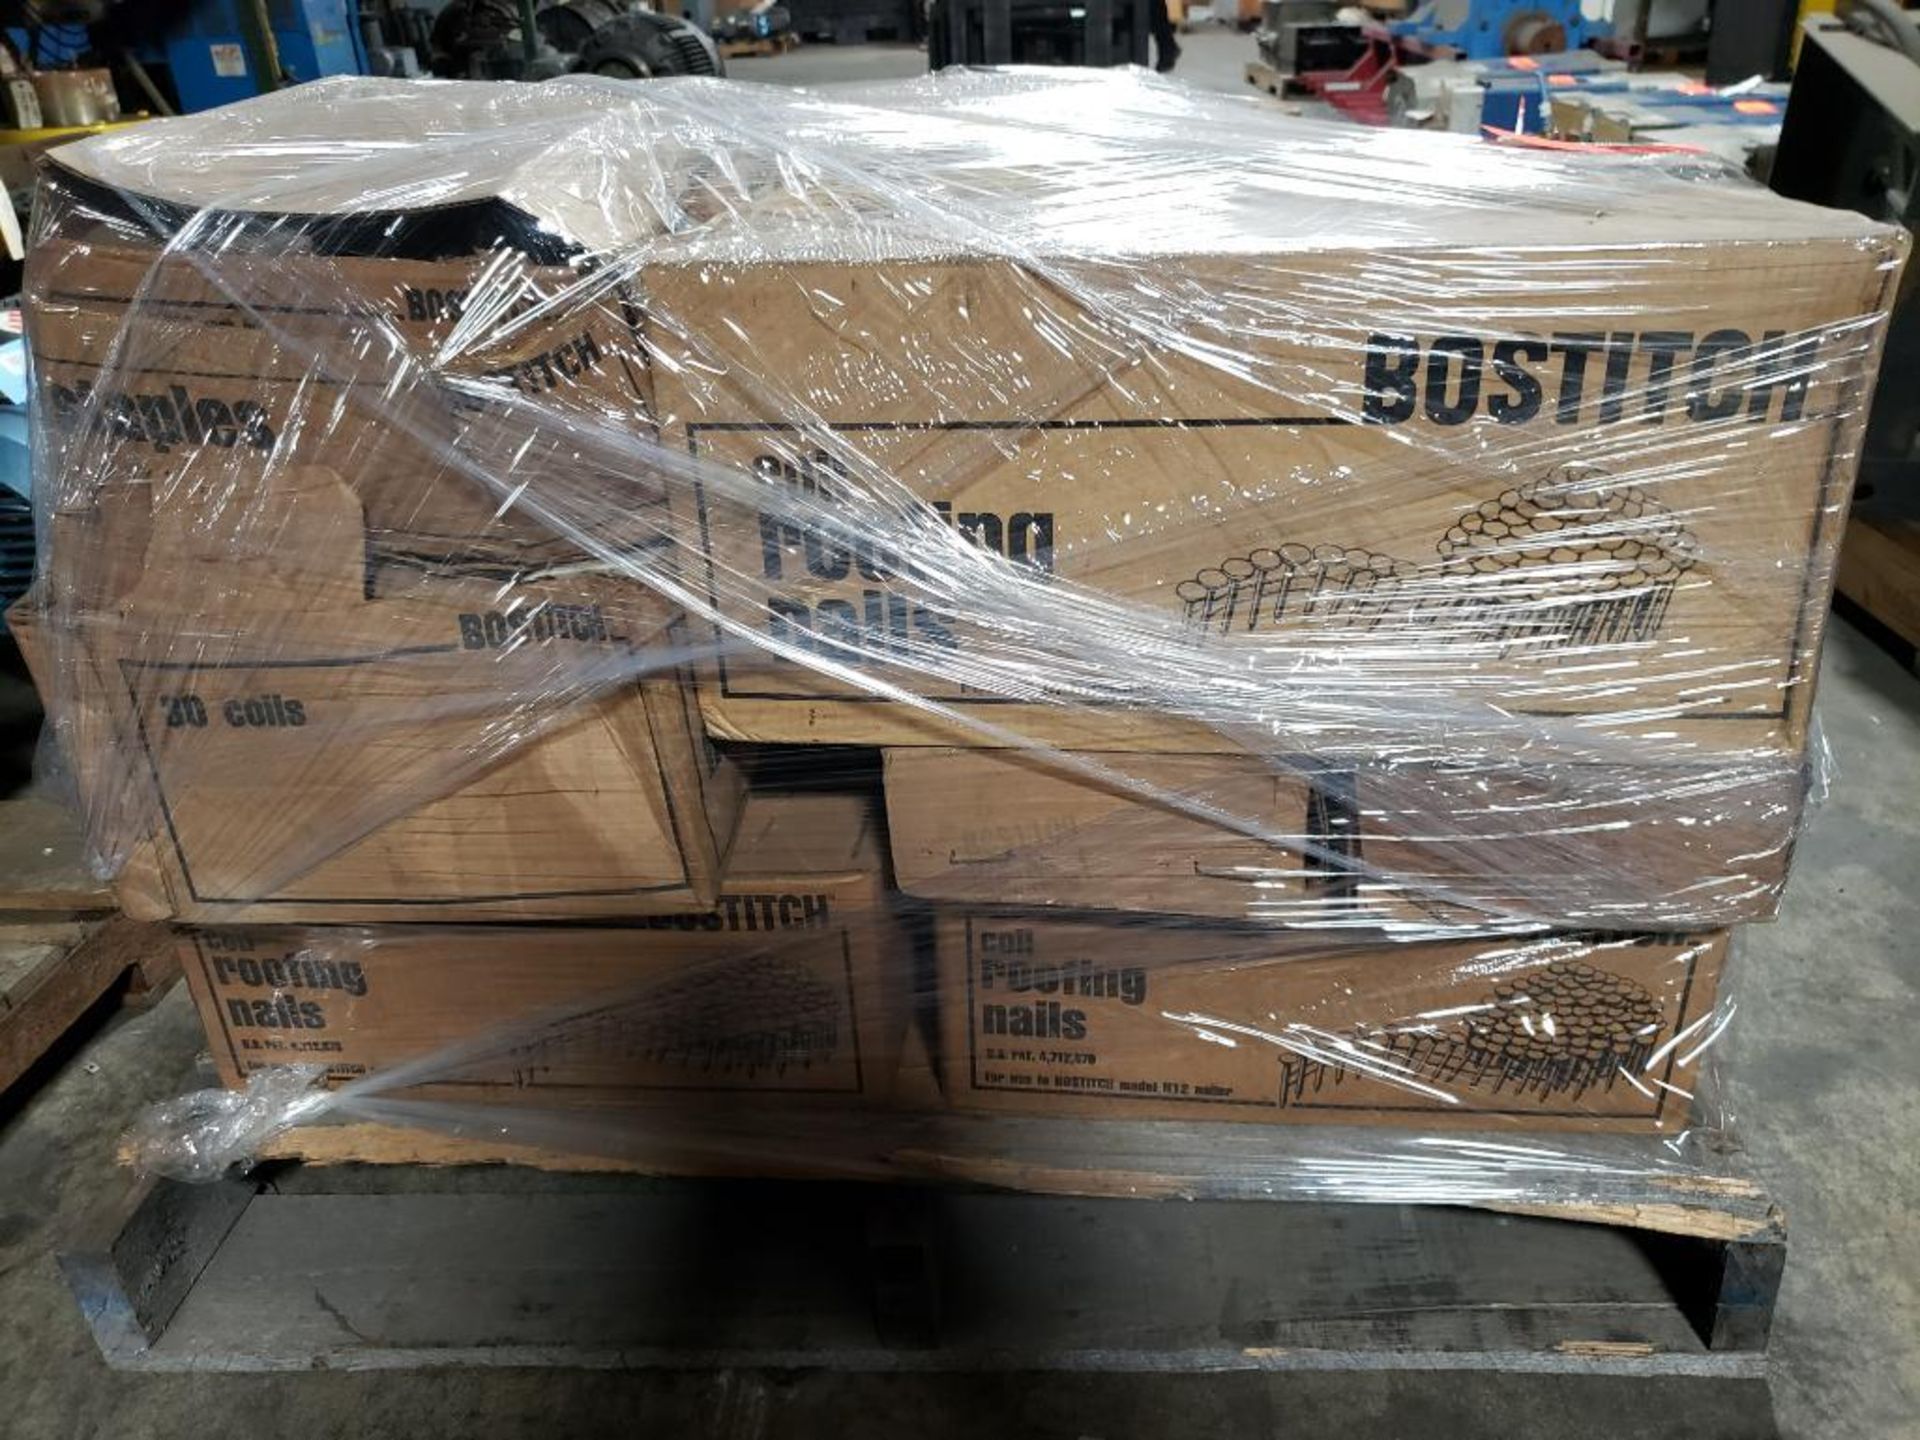 Pallet of Bostich coil roofing nails.